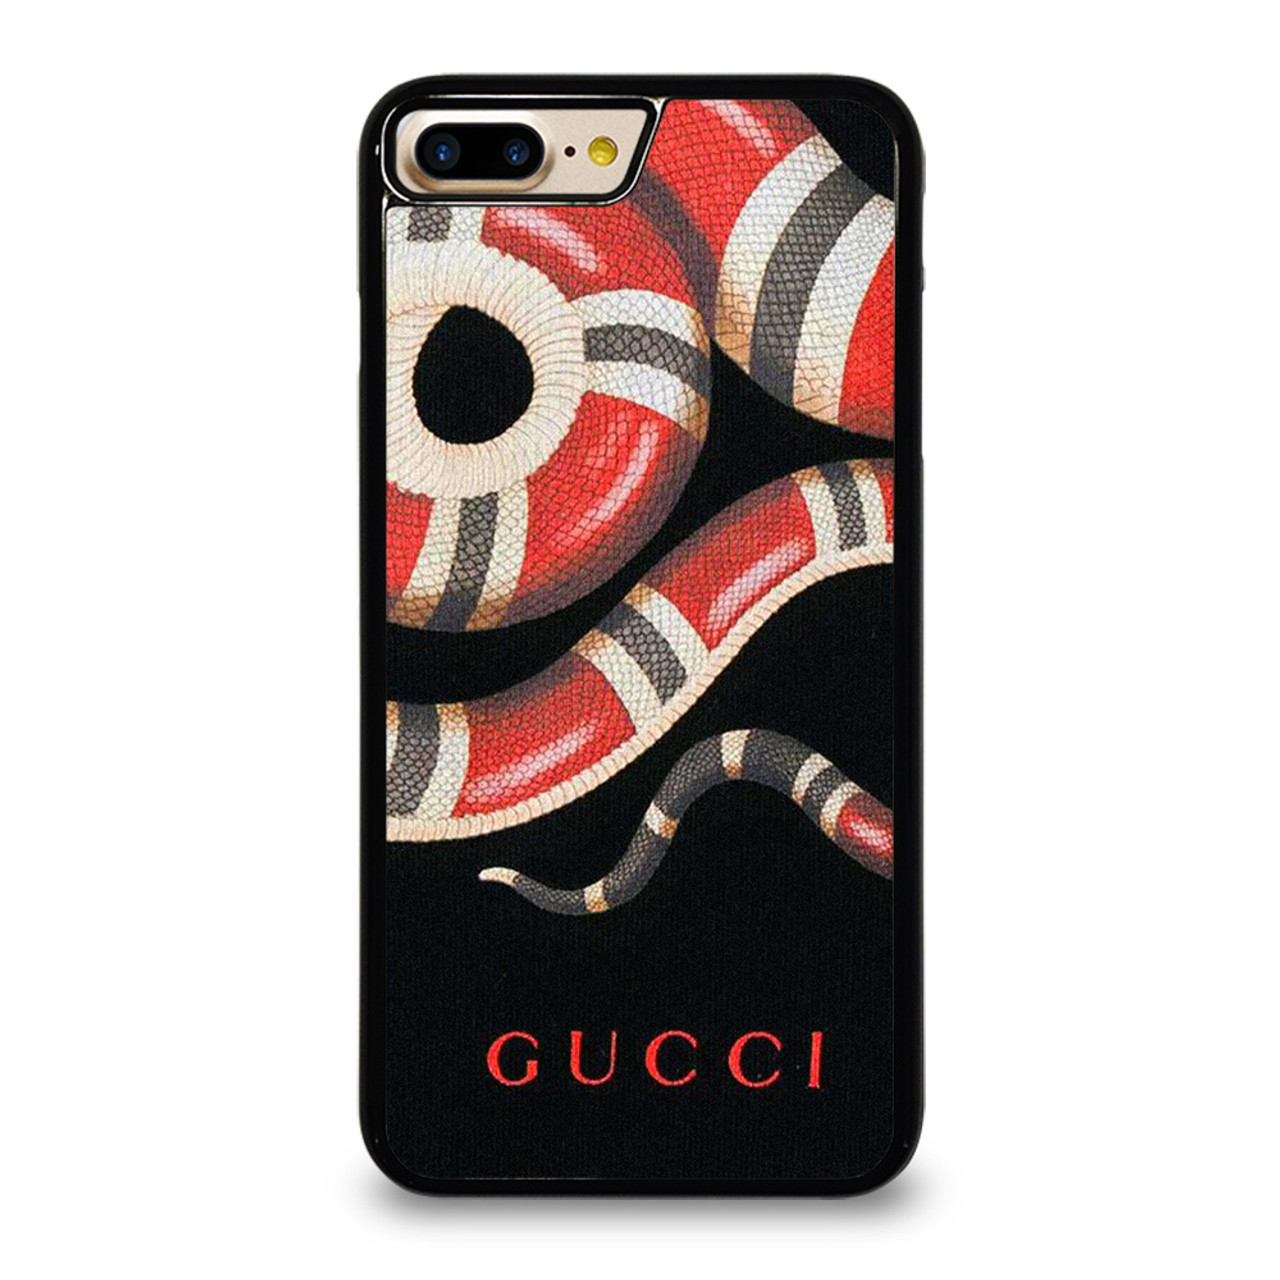 GUCCI LEATHER iPhone 7 / 8 Plus Case Cover